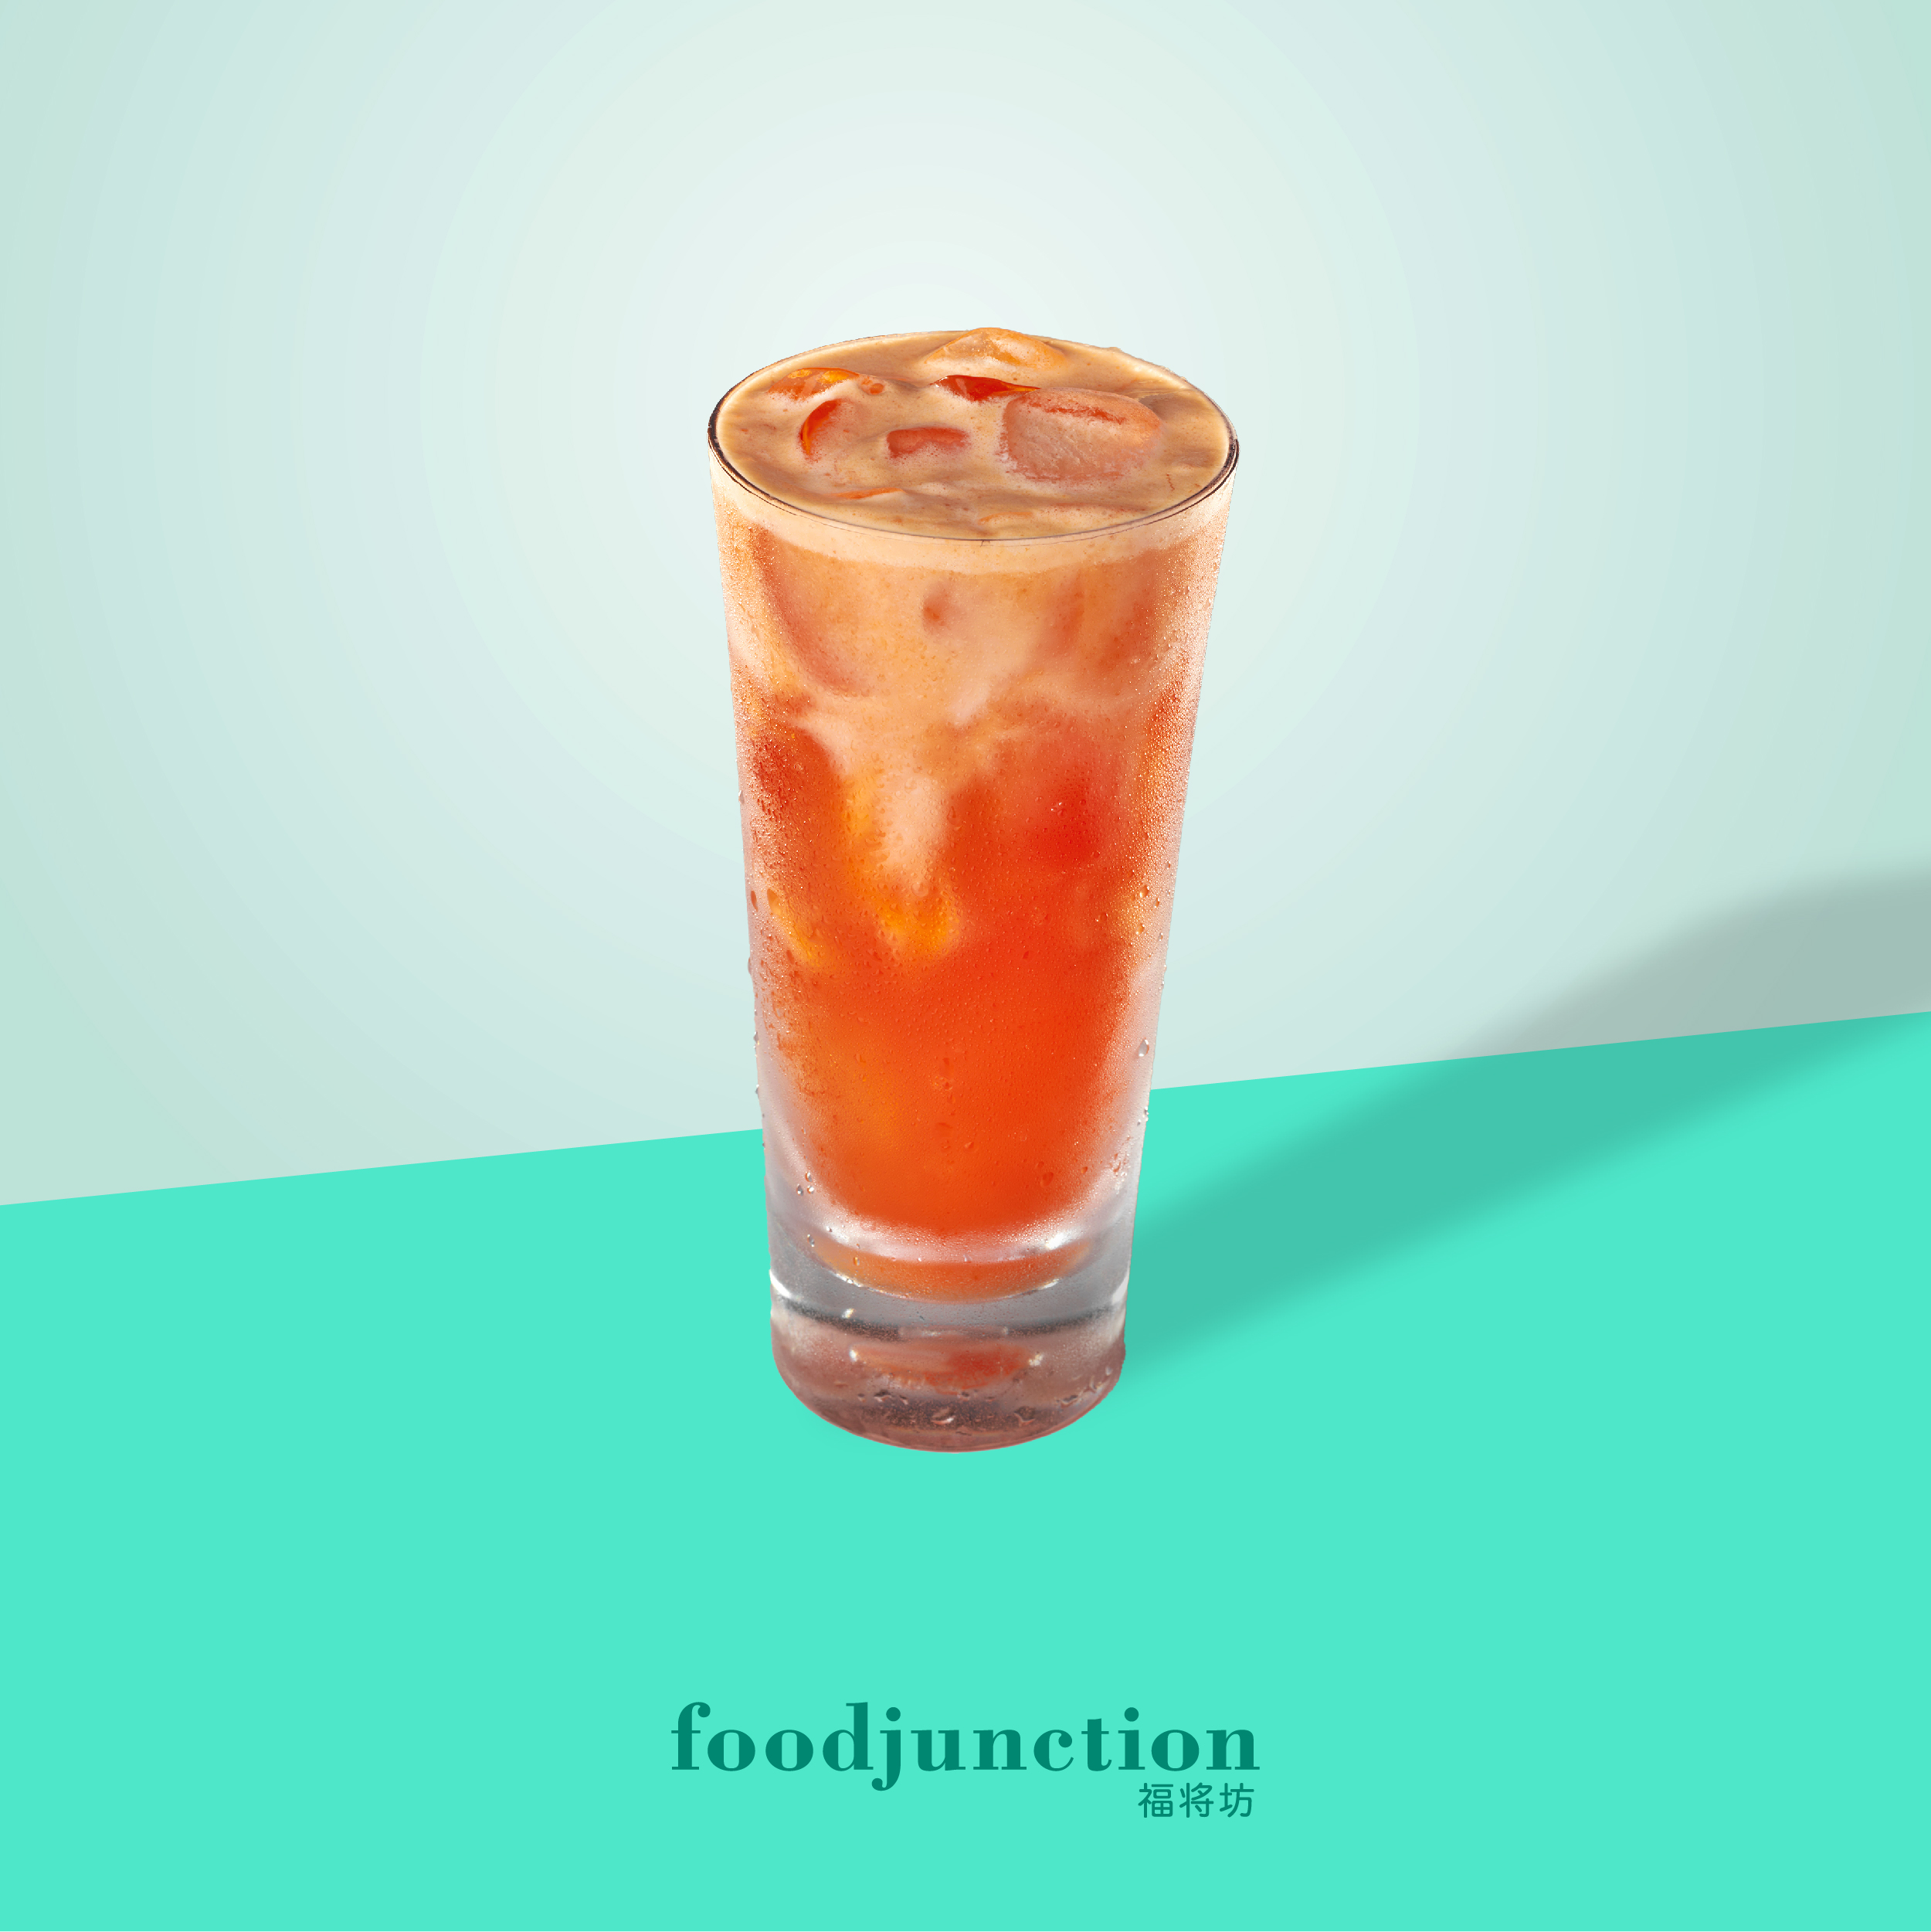 Food Junction Papaya Milk 16oz Redeem At All Outlets Except Rivervale Mall And One Raffles Place Lazada Singapore